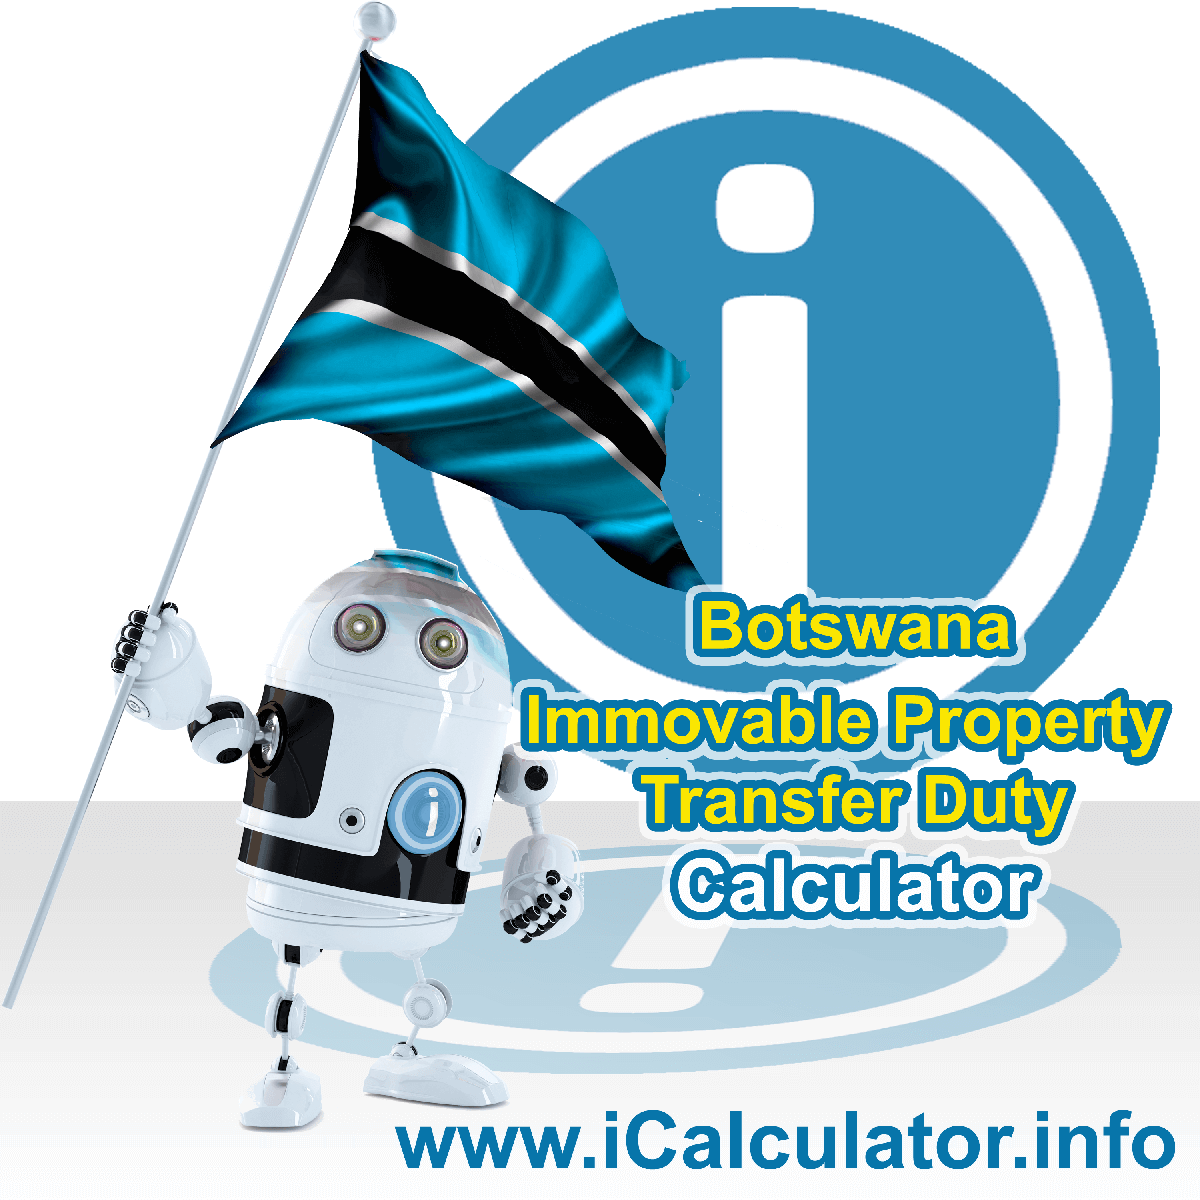 Botswana IPTD Calculator. This image shows the Botswana flag and information relating to the IPTD formula used for calculating the transfer duty on immovable property in Botswana using the Botswana IPTD Calculator in 2023